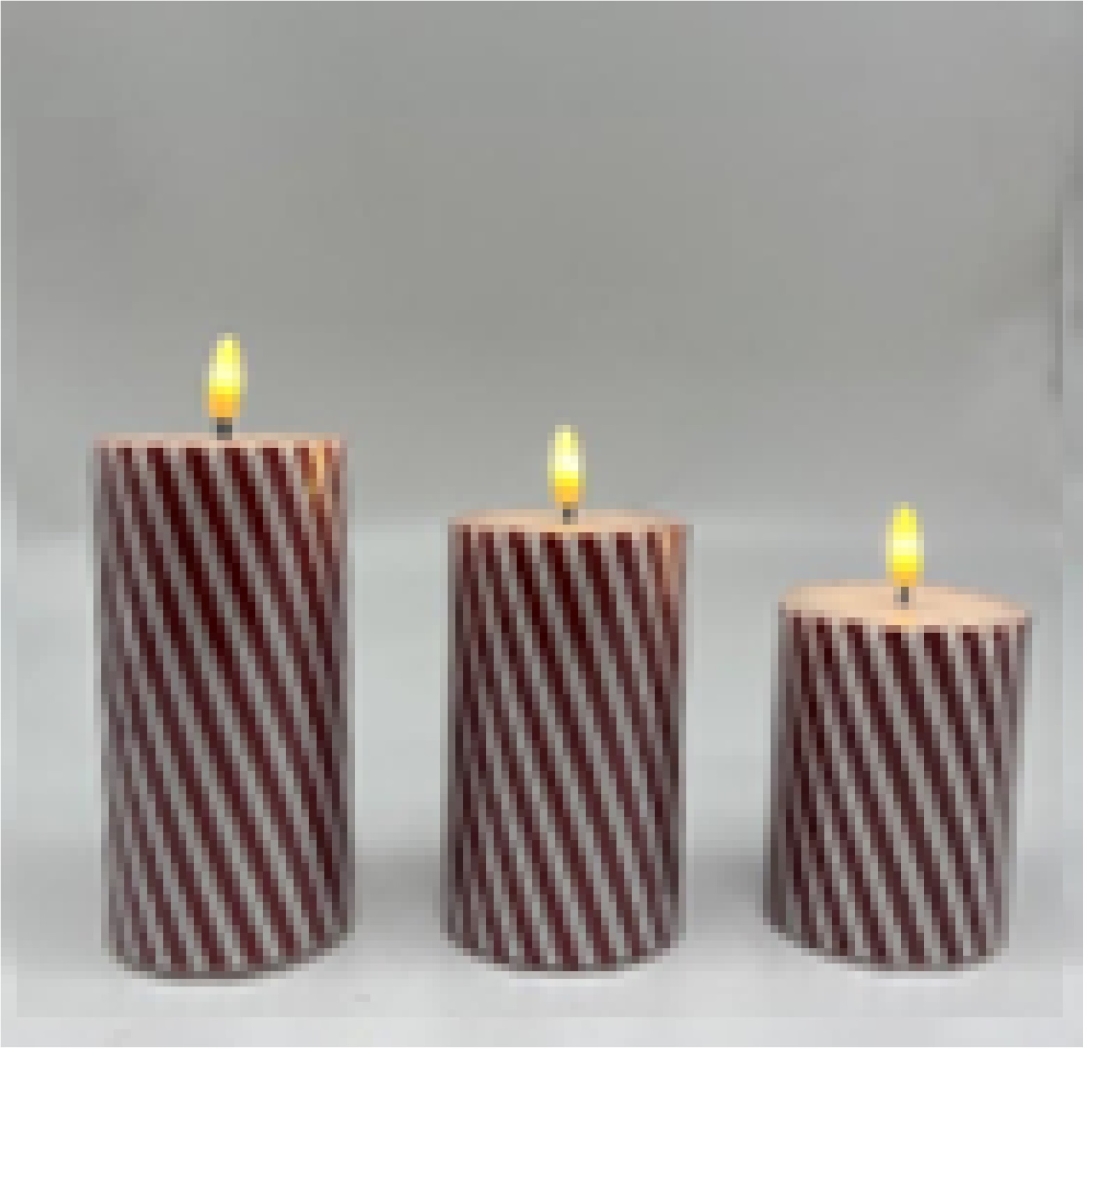 35702177 6 in. Flameless Glittered Stripes Flickering LED Christmas Wax Pillar Candles - Set of 3 -  NorthLight